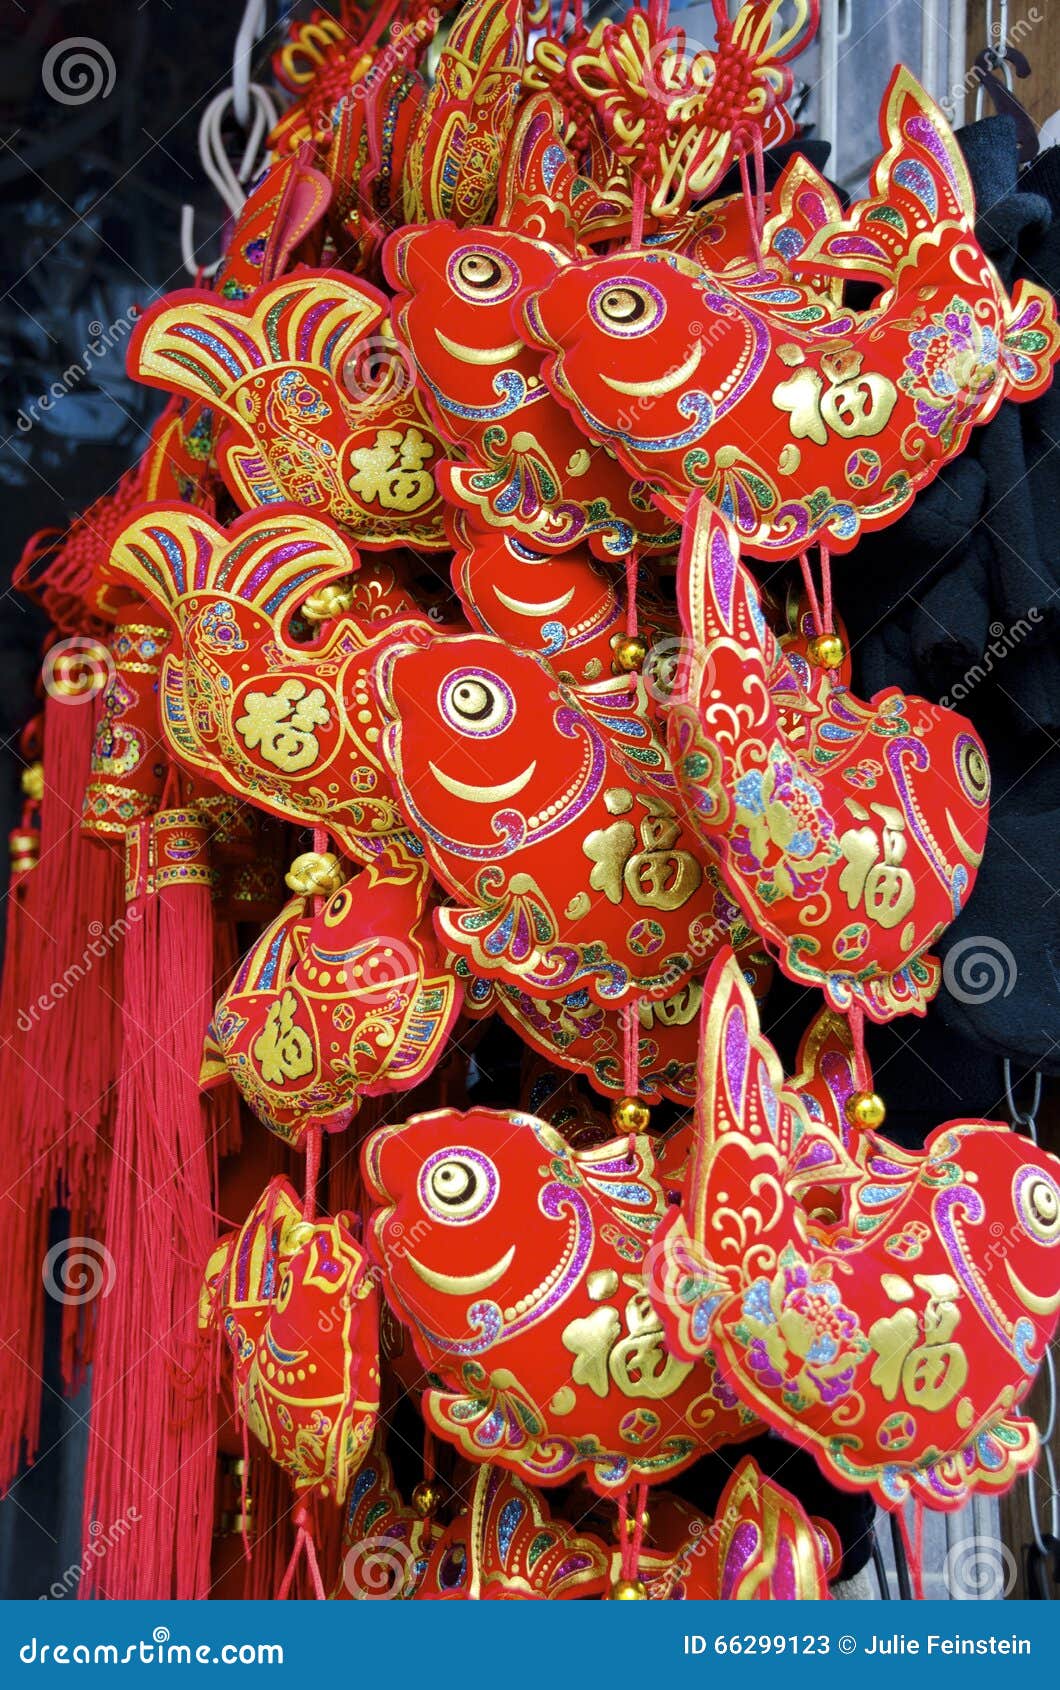 https://thumbs.dreamstime.com/z/d%C3%A9corations-chinoises-66299123.jpg